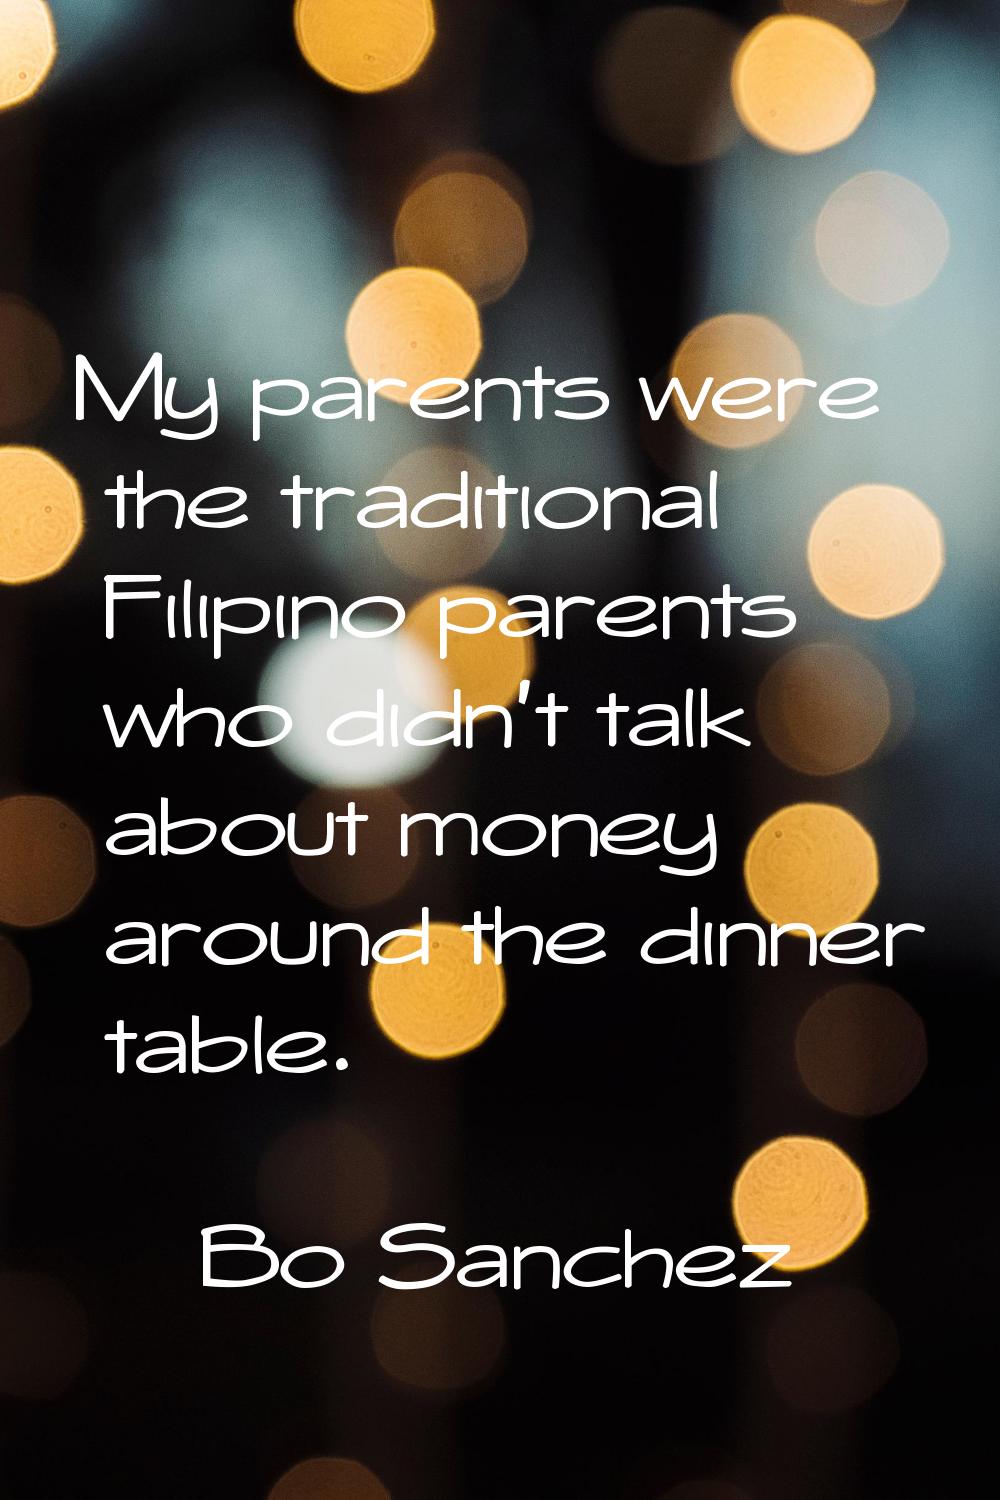 My parents were the traditional Filipino parents who didn't talk about money around the dinner tabl